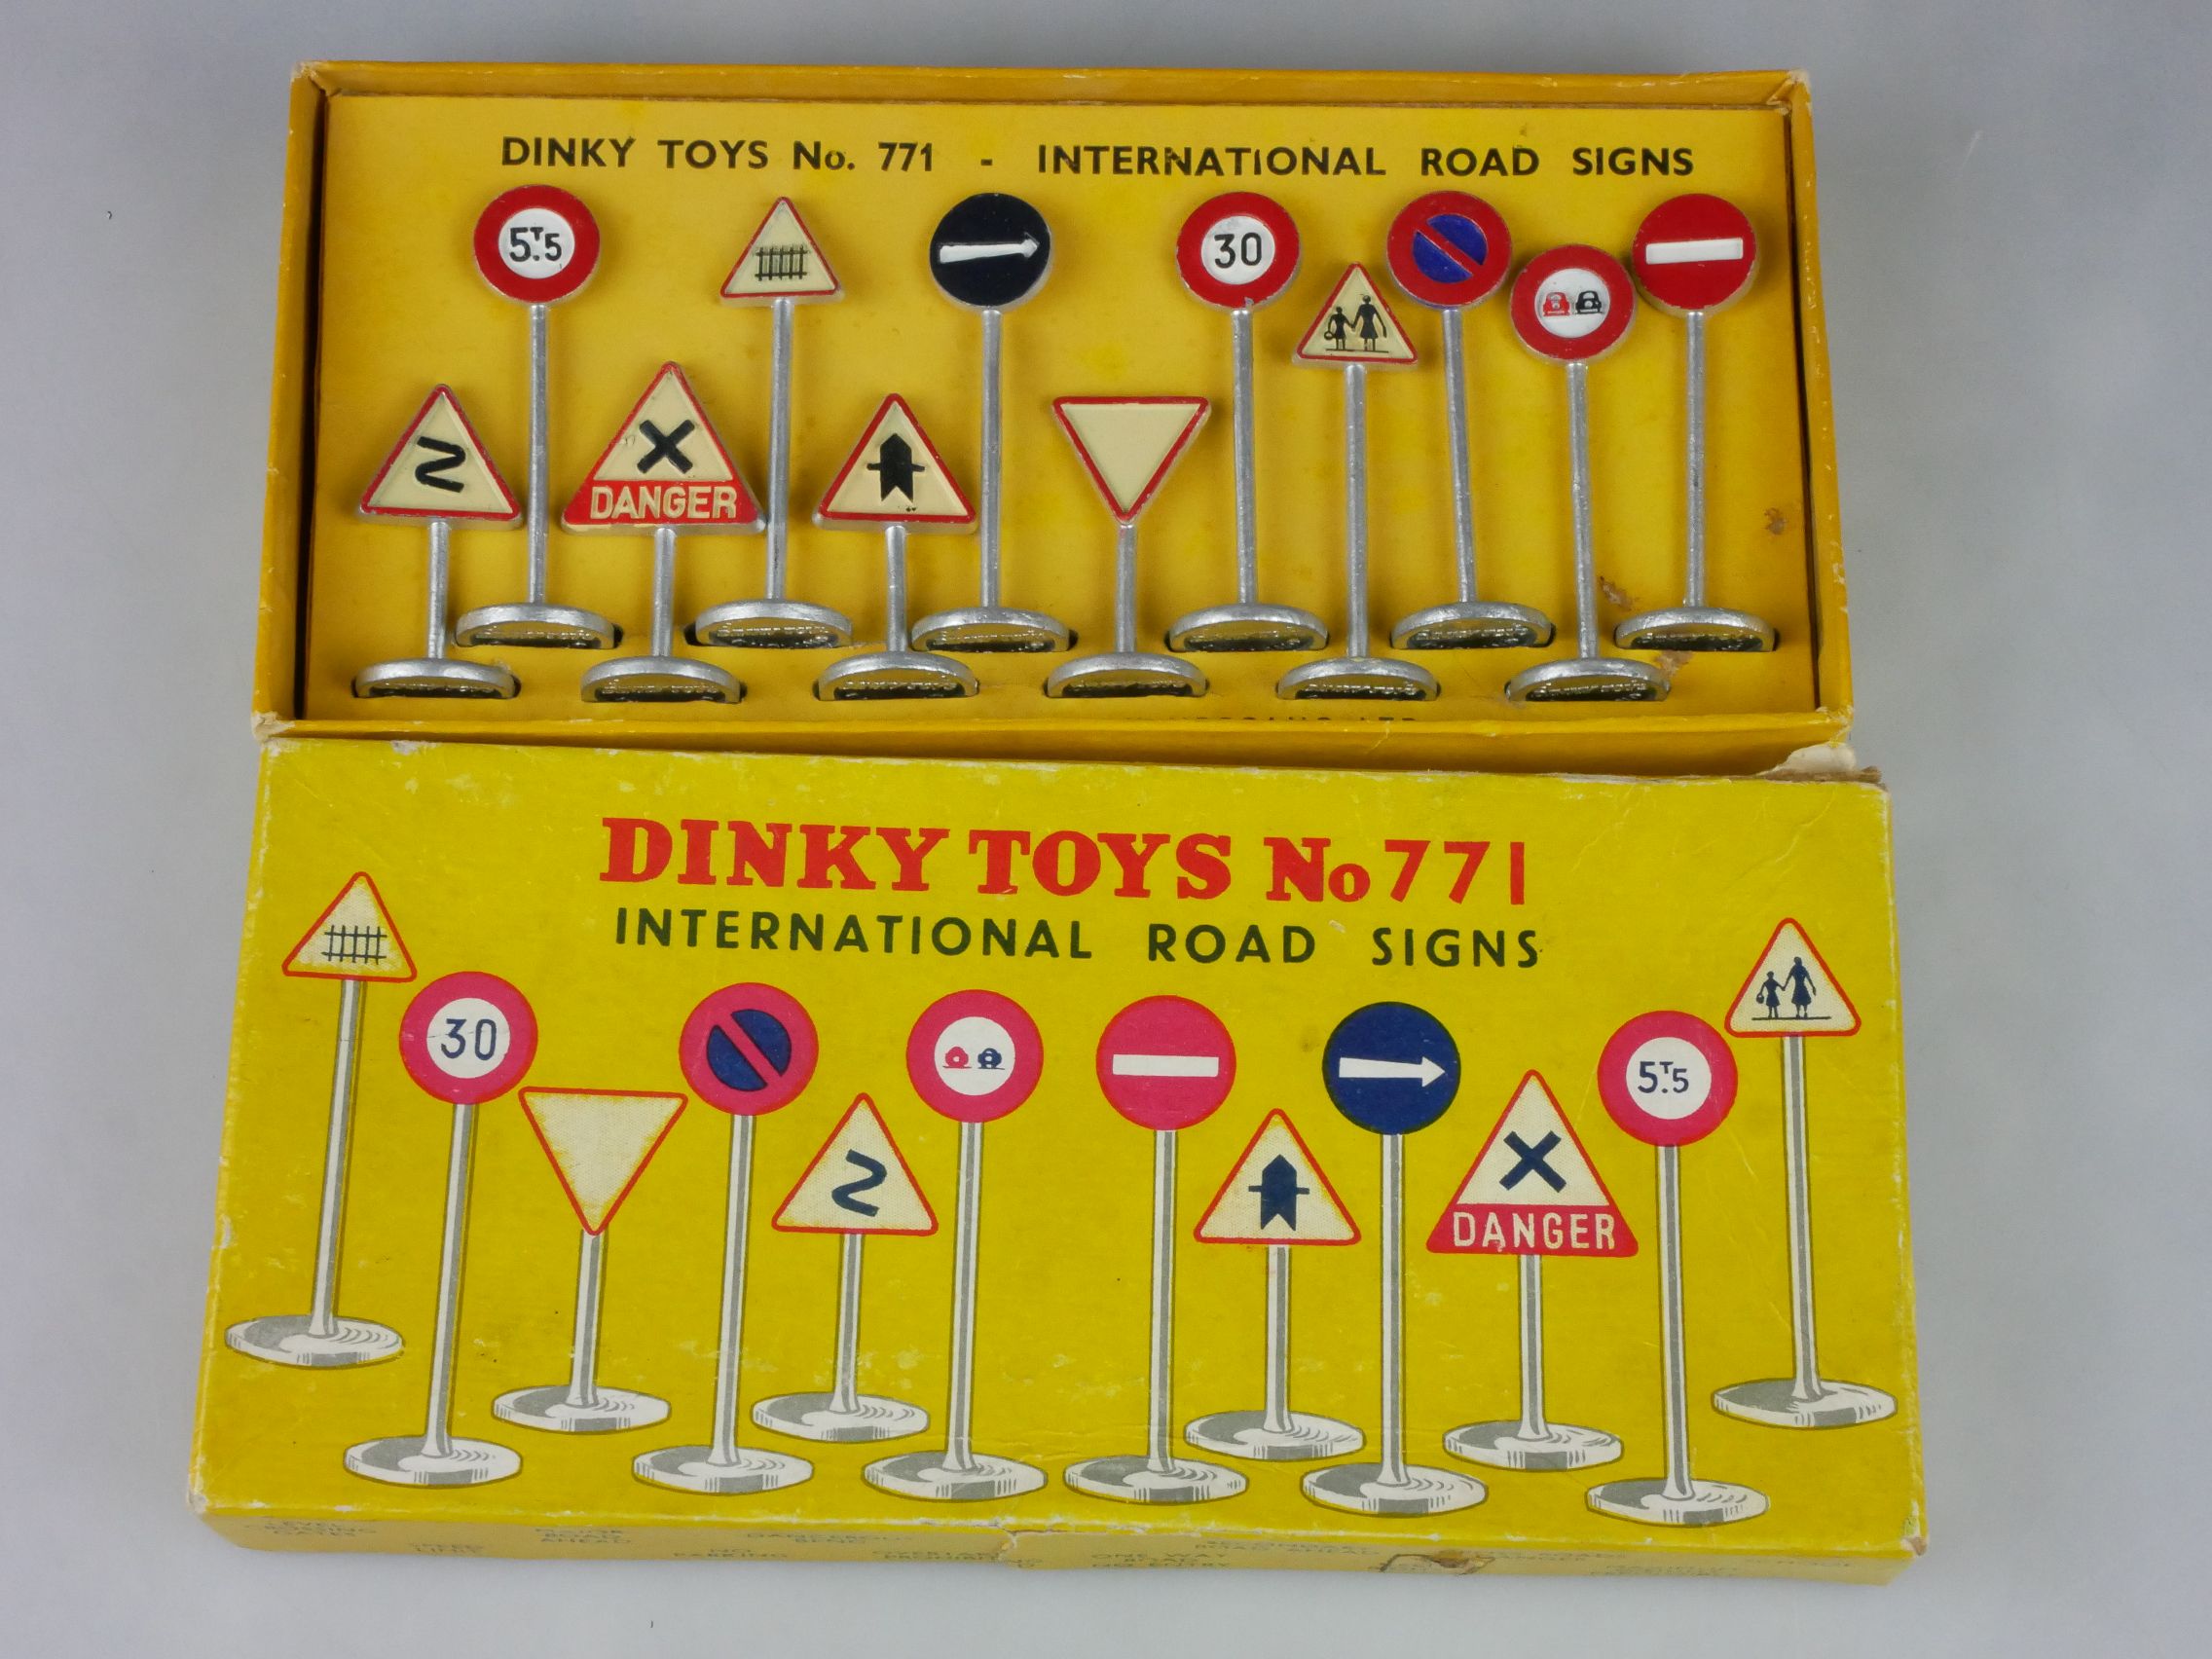 Dinky Toys 771 International Road Signs Made in England Box 126749